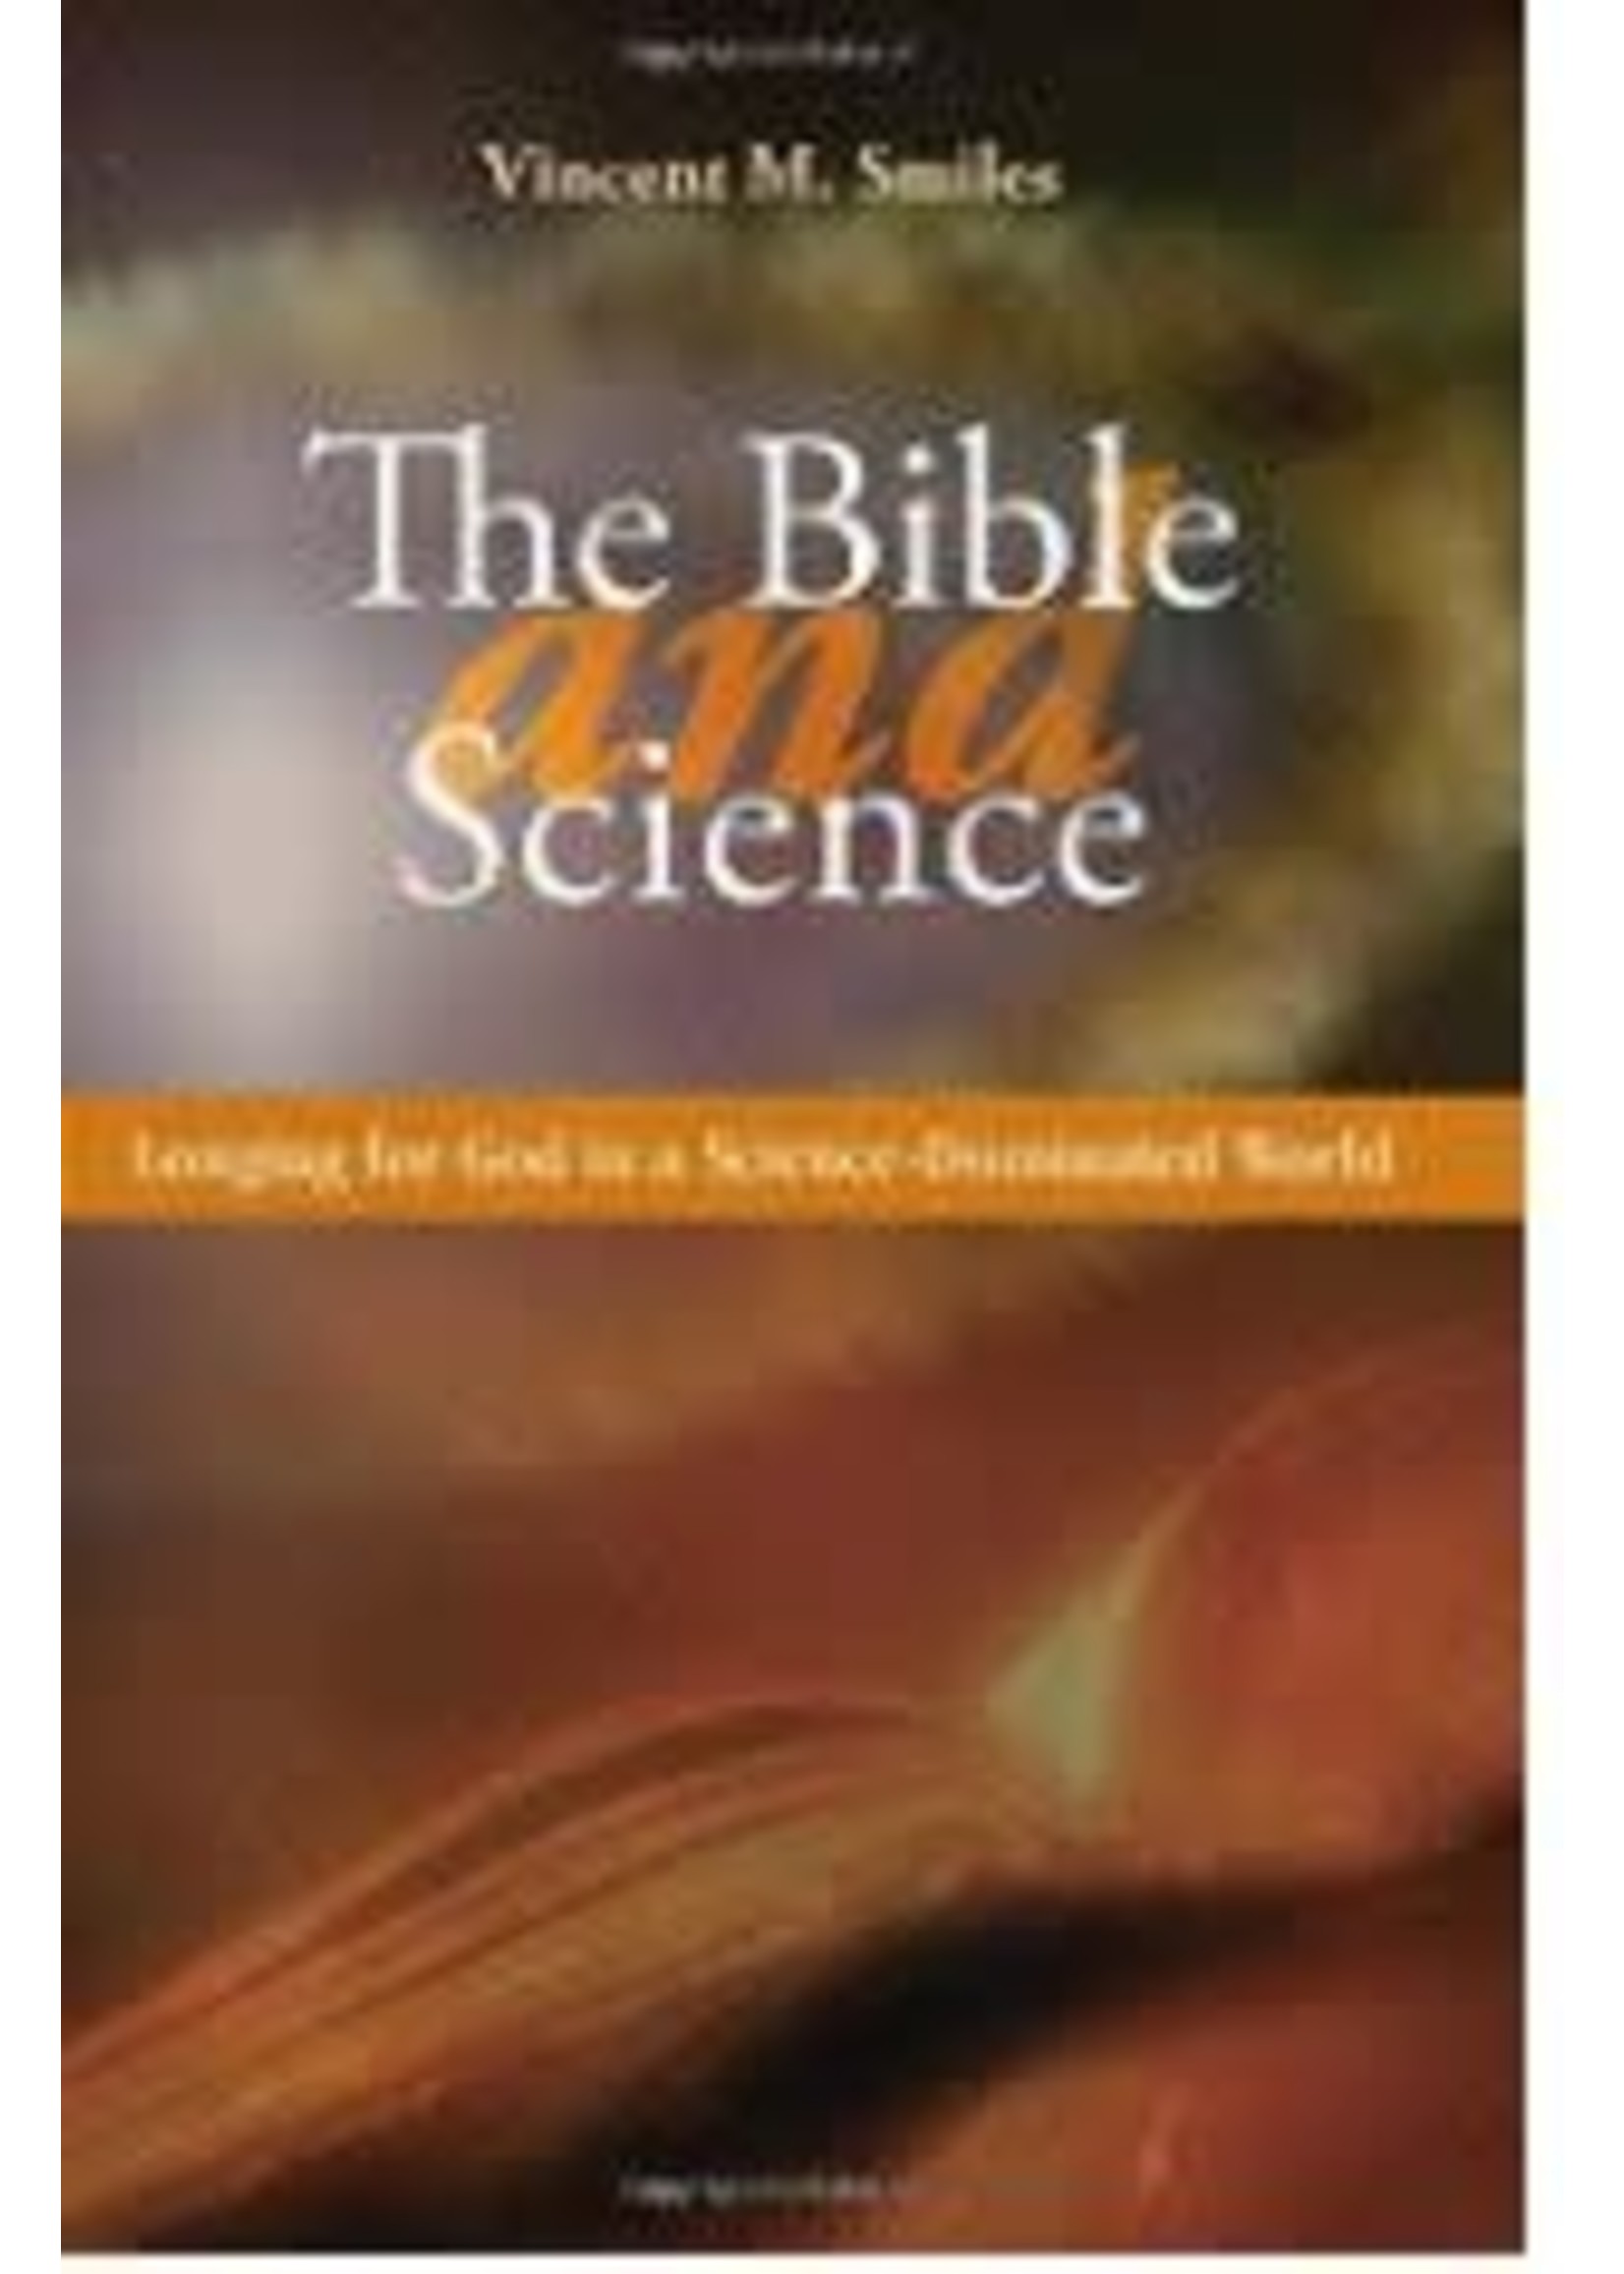 The Bible and Science: Longing for God in a Science-Dominated World (Theology And Life)